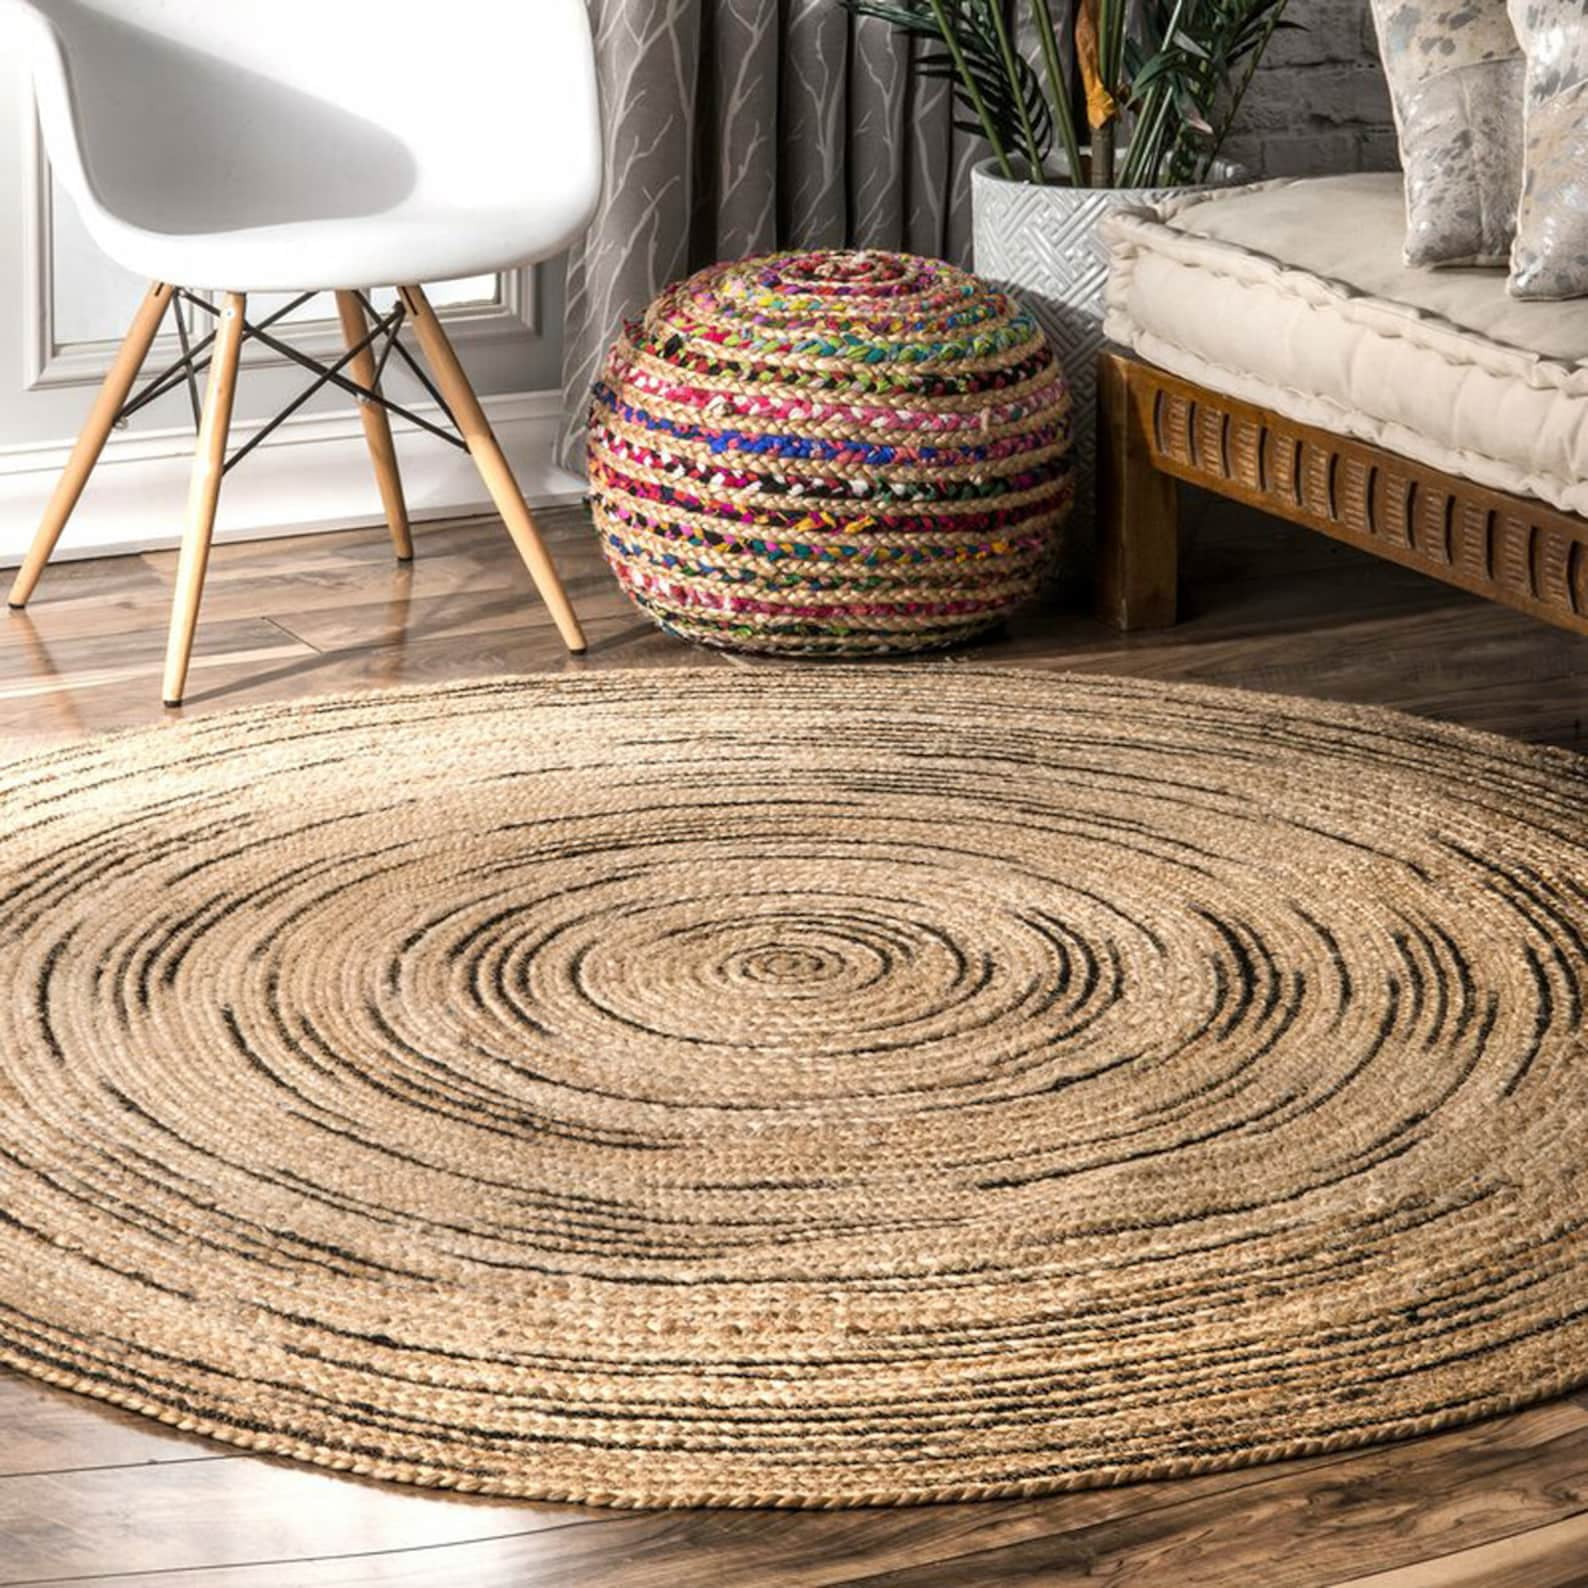 Gahilot International Handwoven Jute Area Rug,Natural Yarn Hand Braided  Round Rugs for Bedroom, Kitchen, Living Room, Farmhouse Rugs for Live